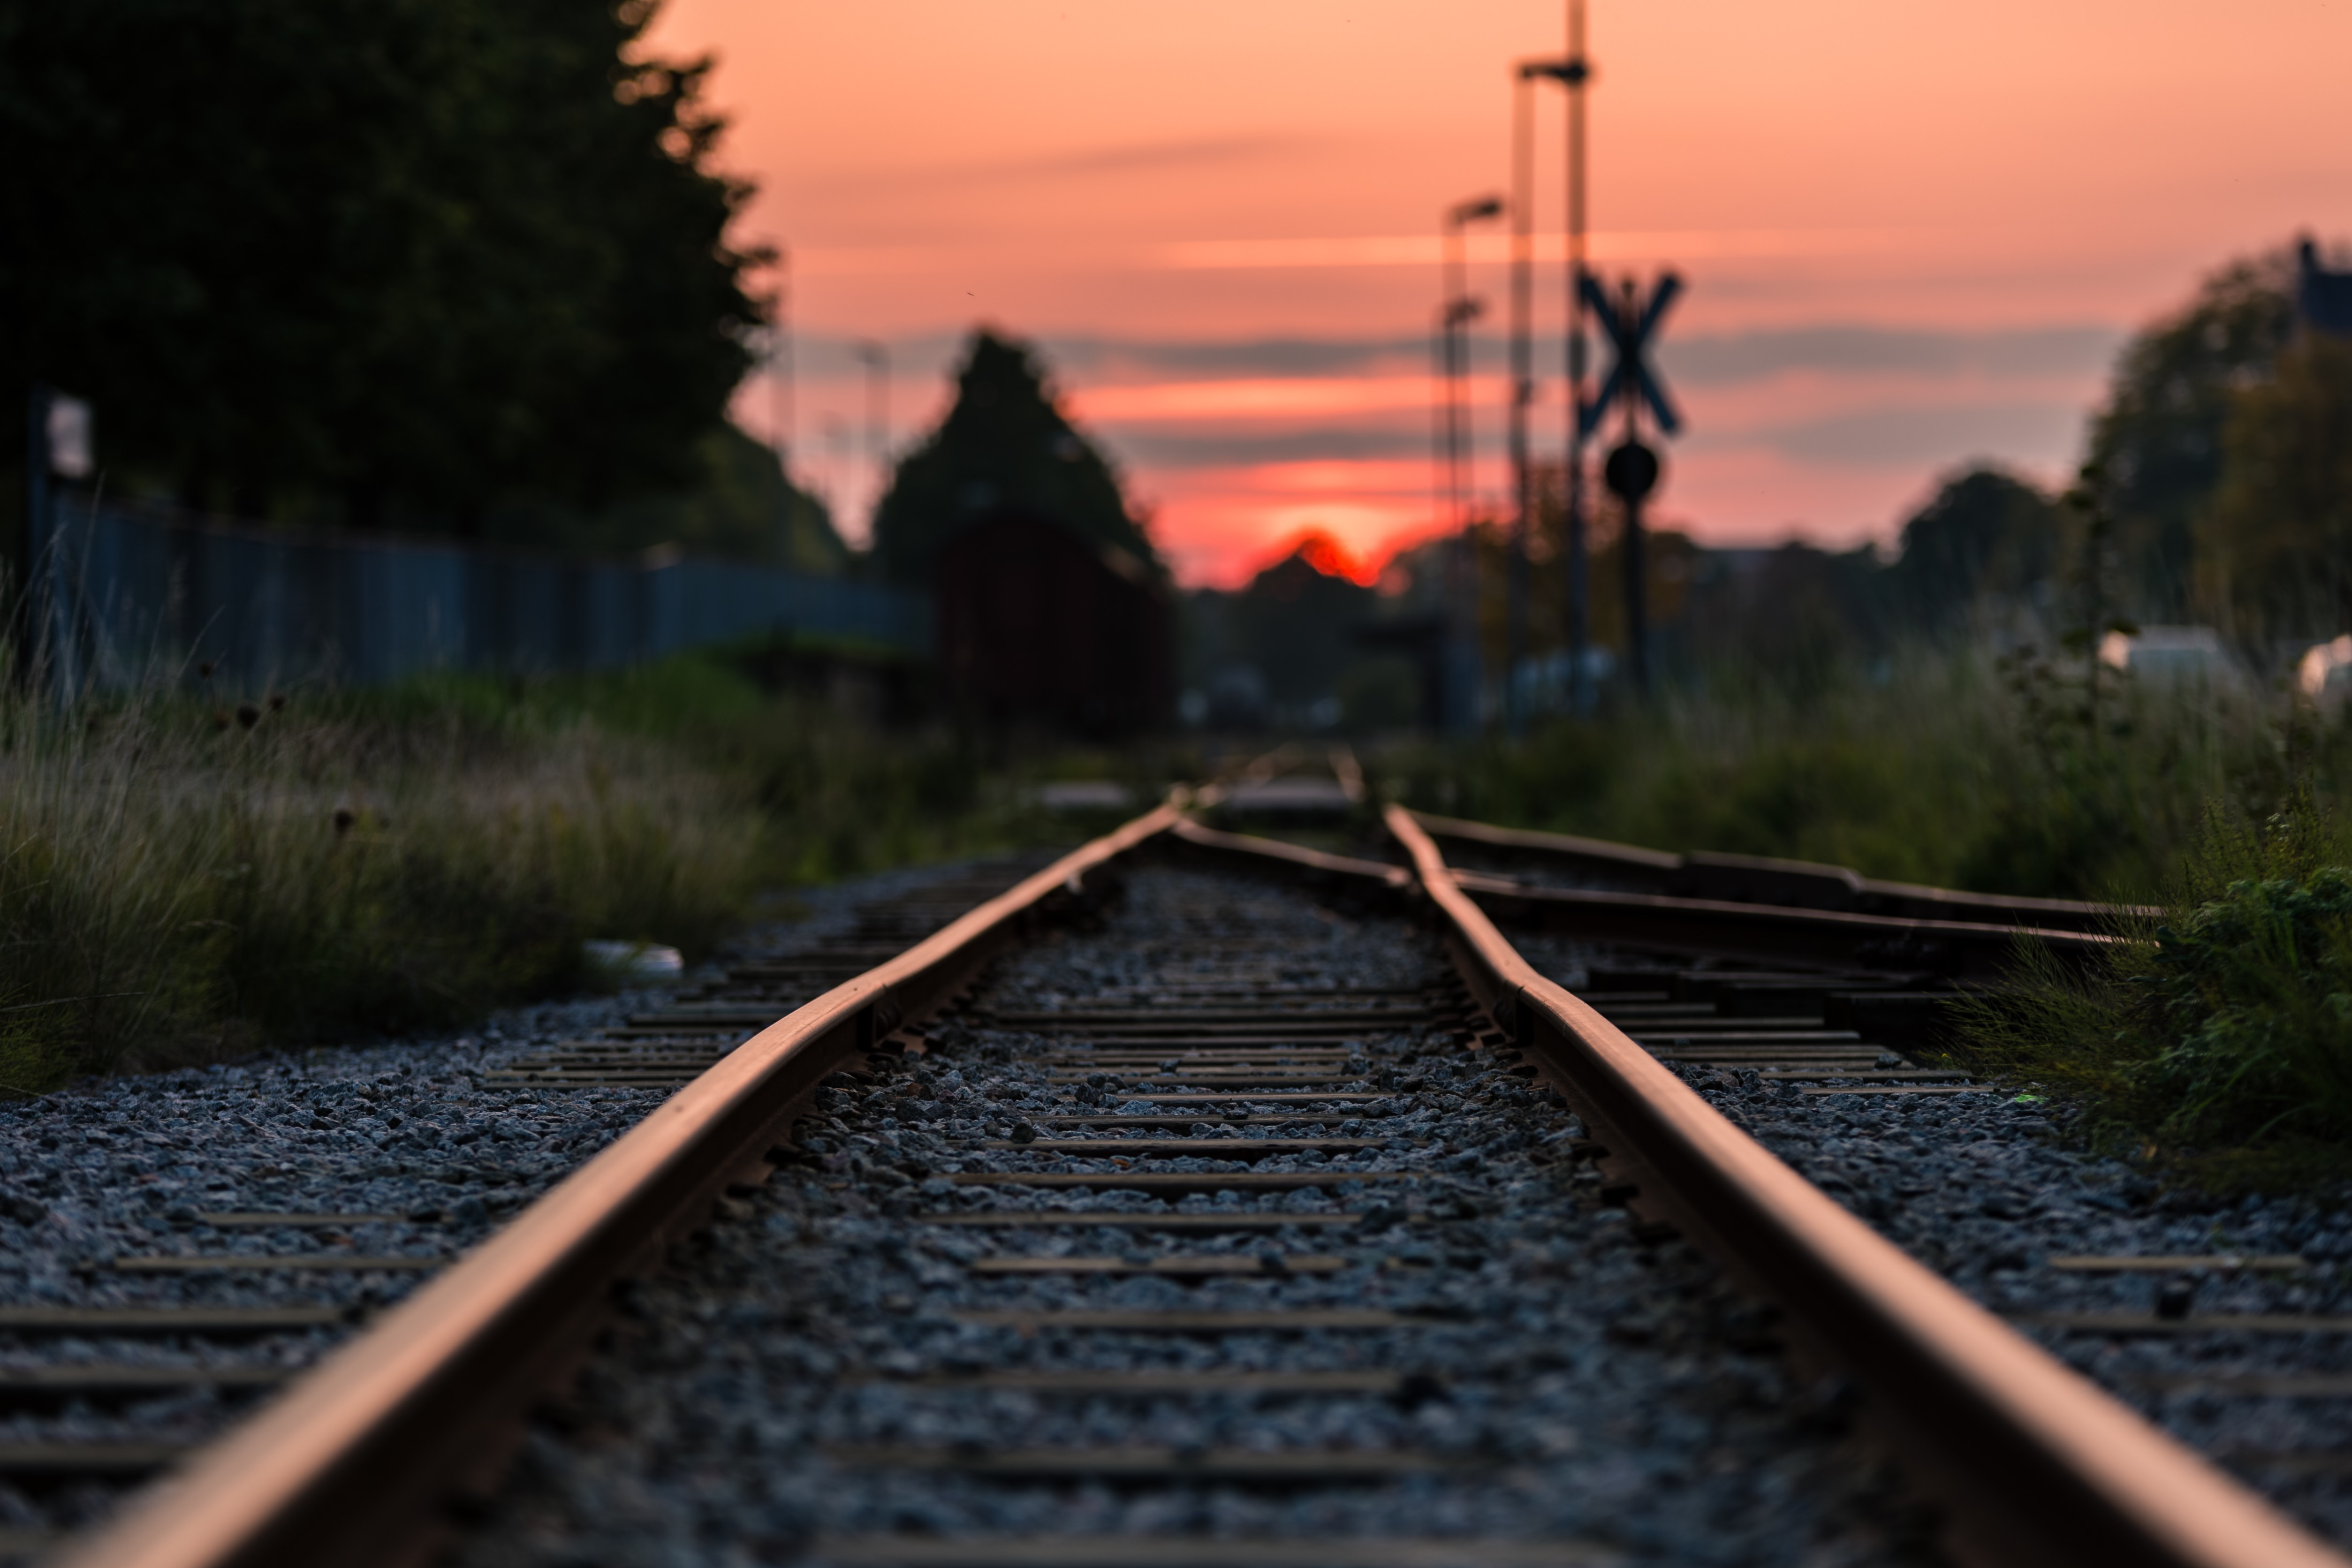 Shallow Focus Photography of Railway during Sunset, Blur, Railway track, Trees, Travel, HQ Photo